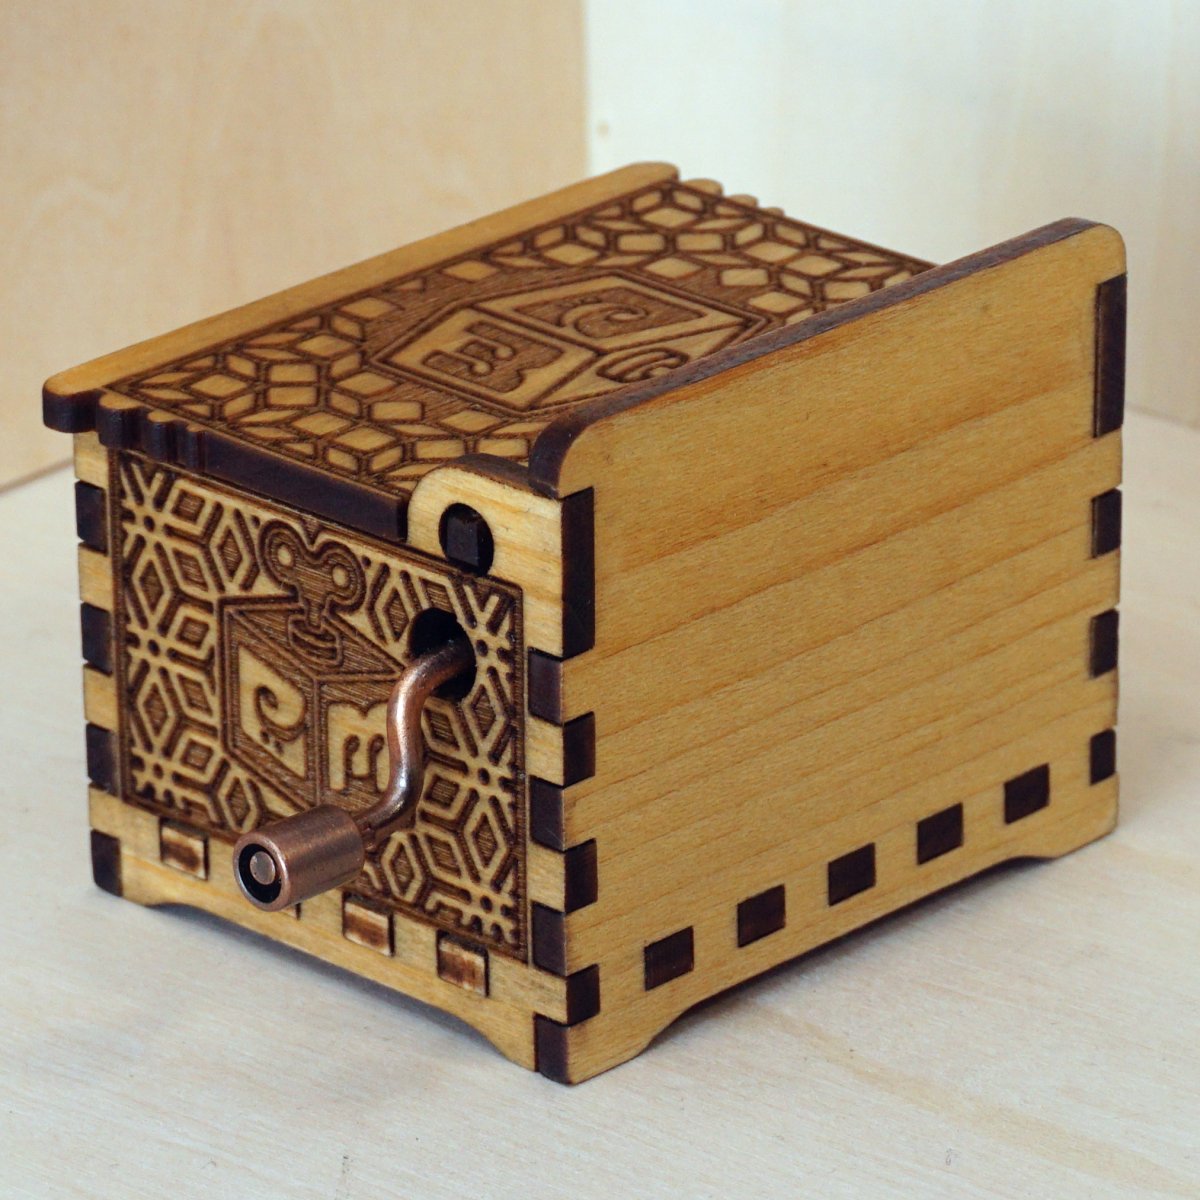 Hand-cranked music box in illustrated cardboard made by Belle Lurette -  Item# of this hand-cranked